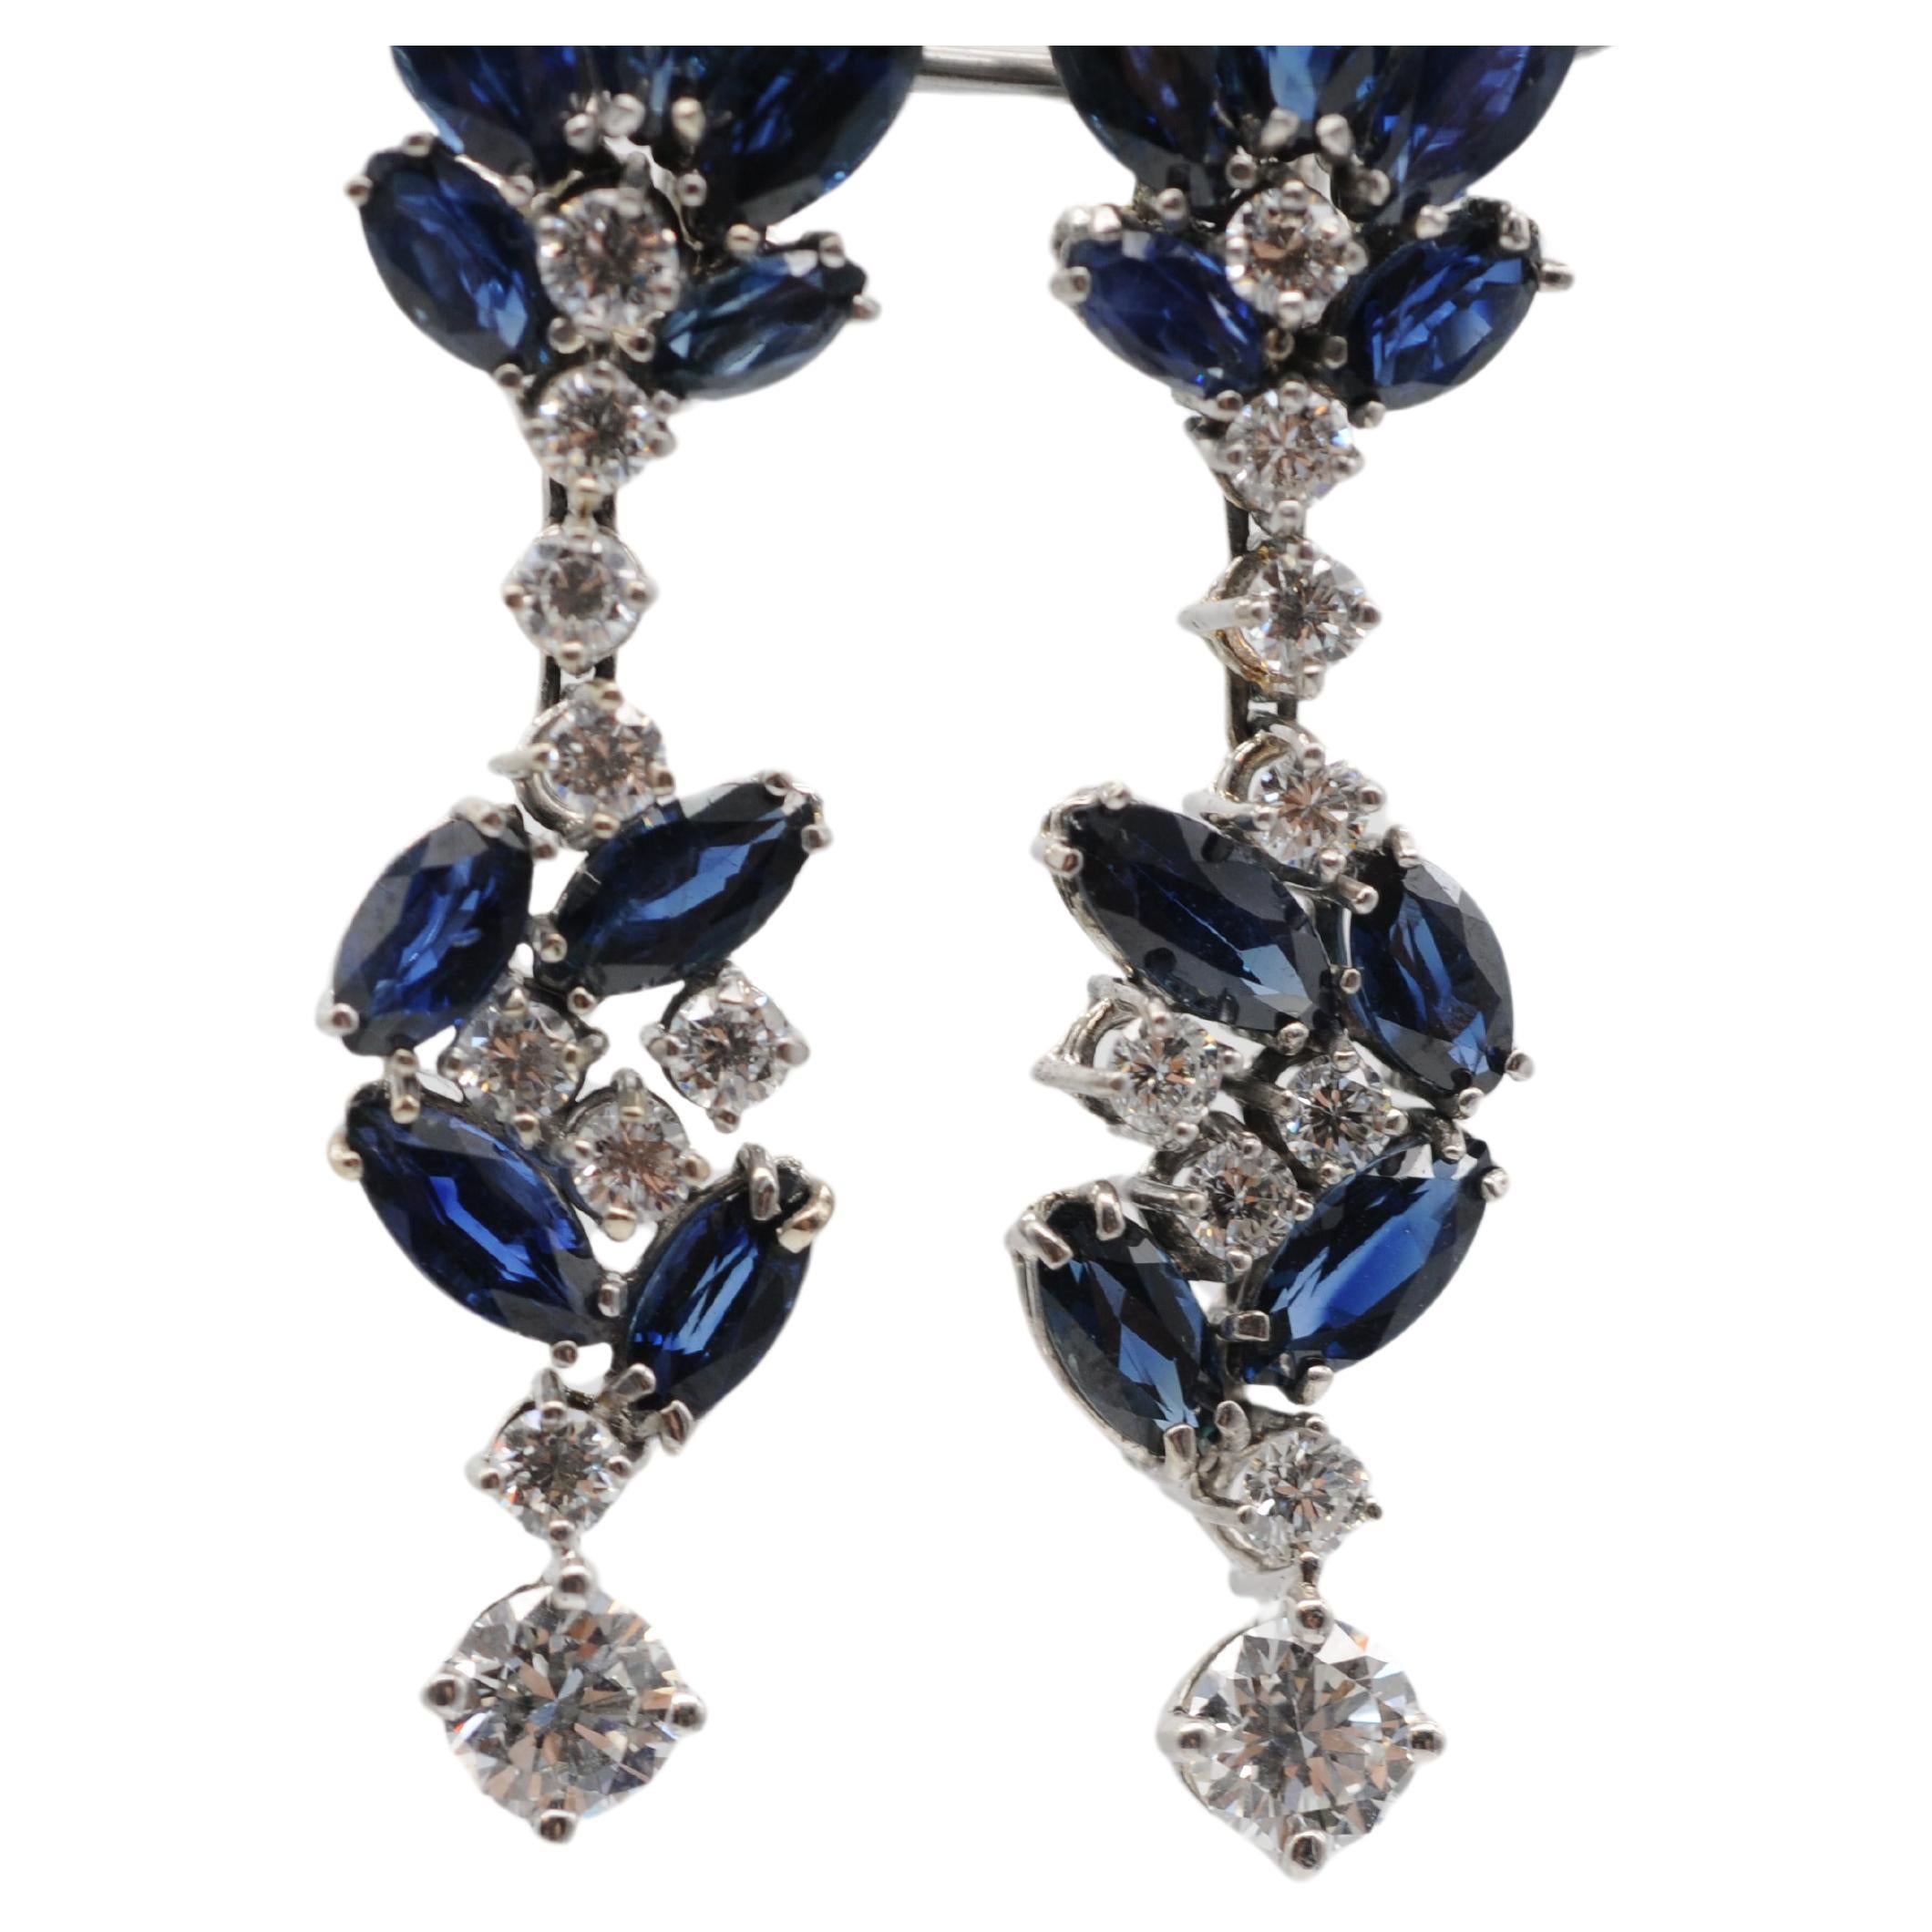 Wonderful earrings in 18k white gold with diamonds and sapphires. For Sale